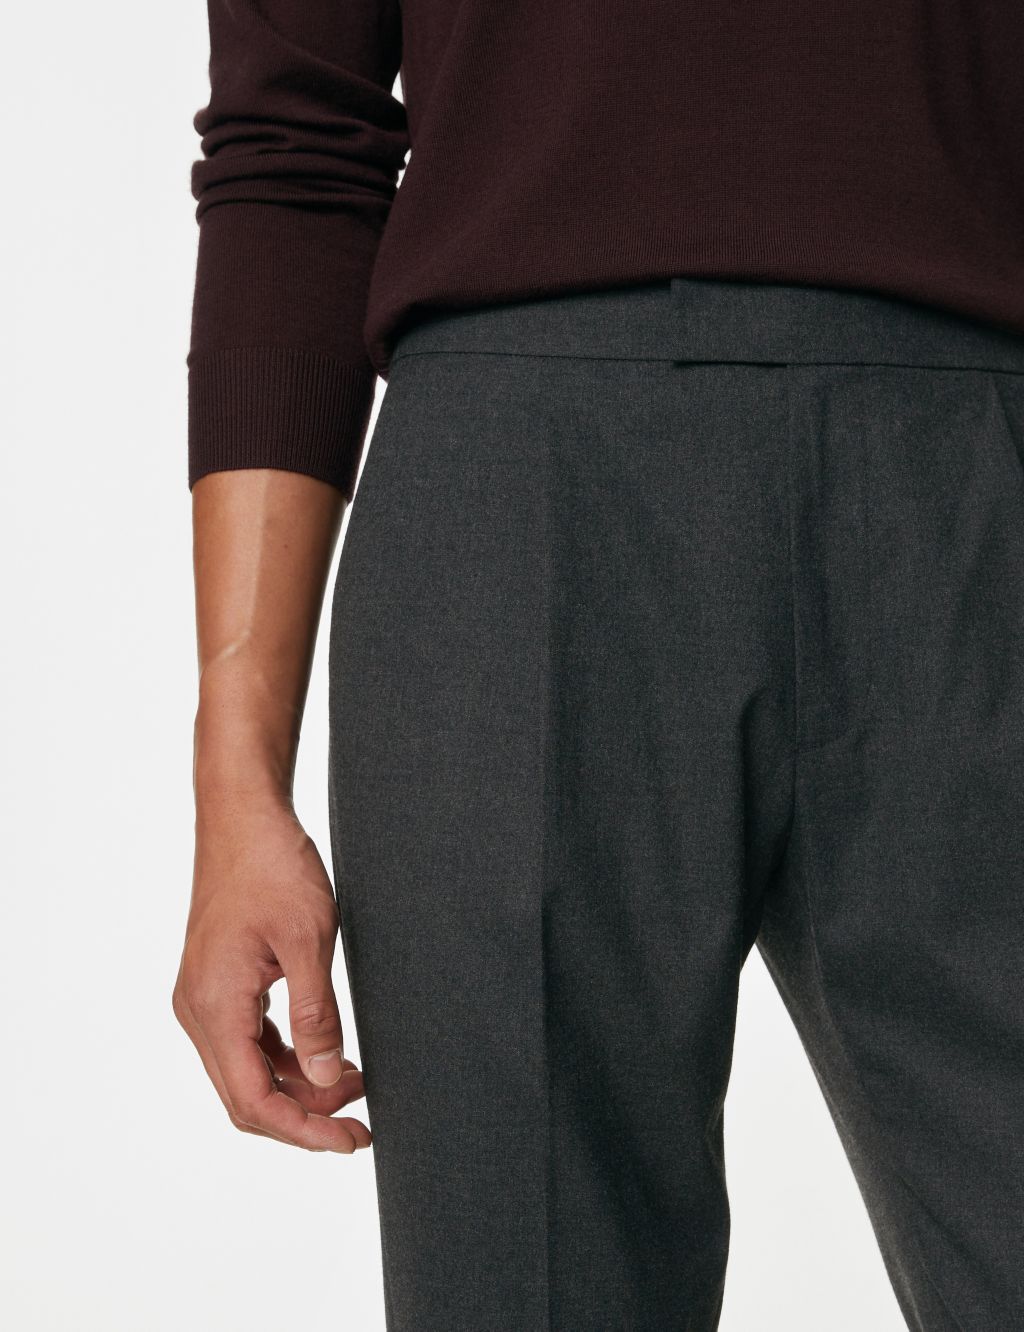 Single Pleat Brushed Stretch Trouser image 4